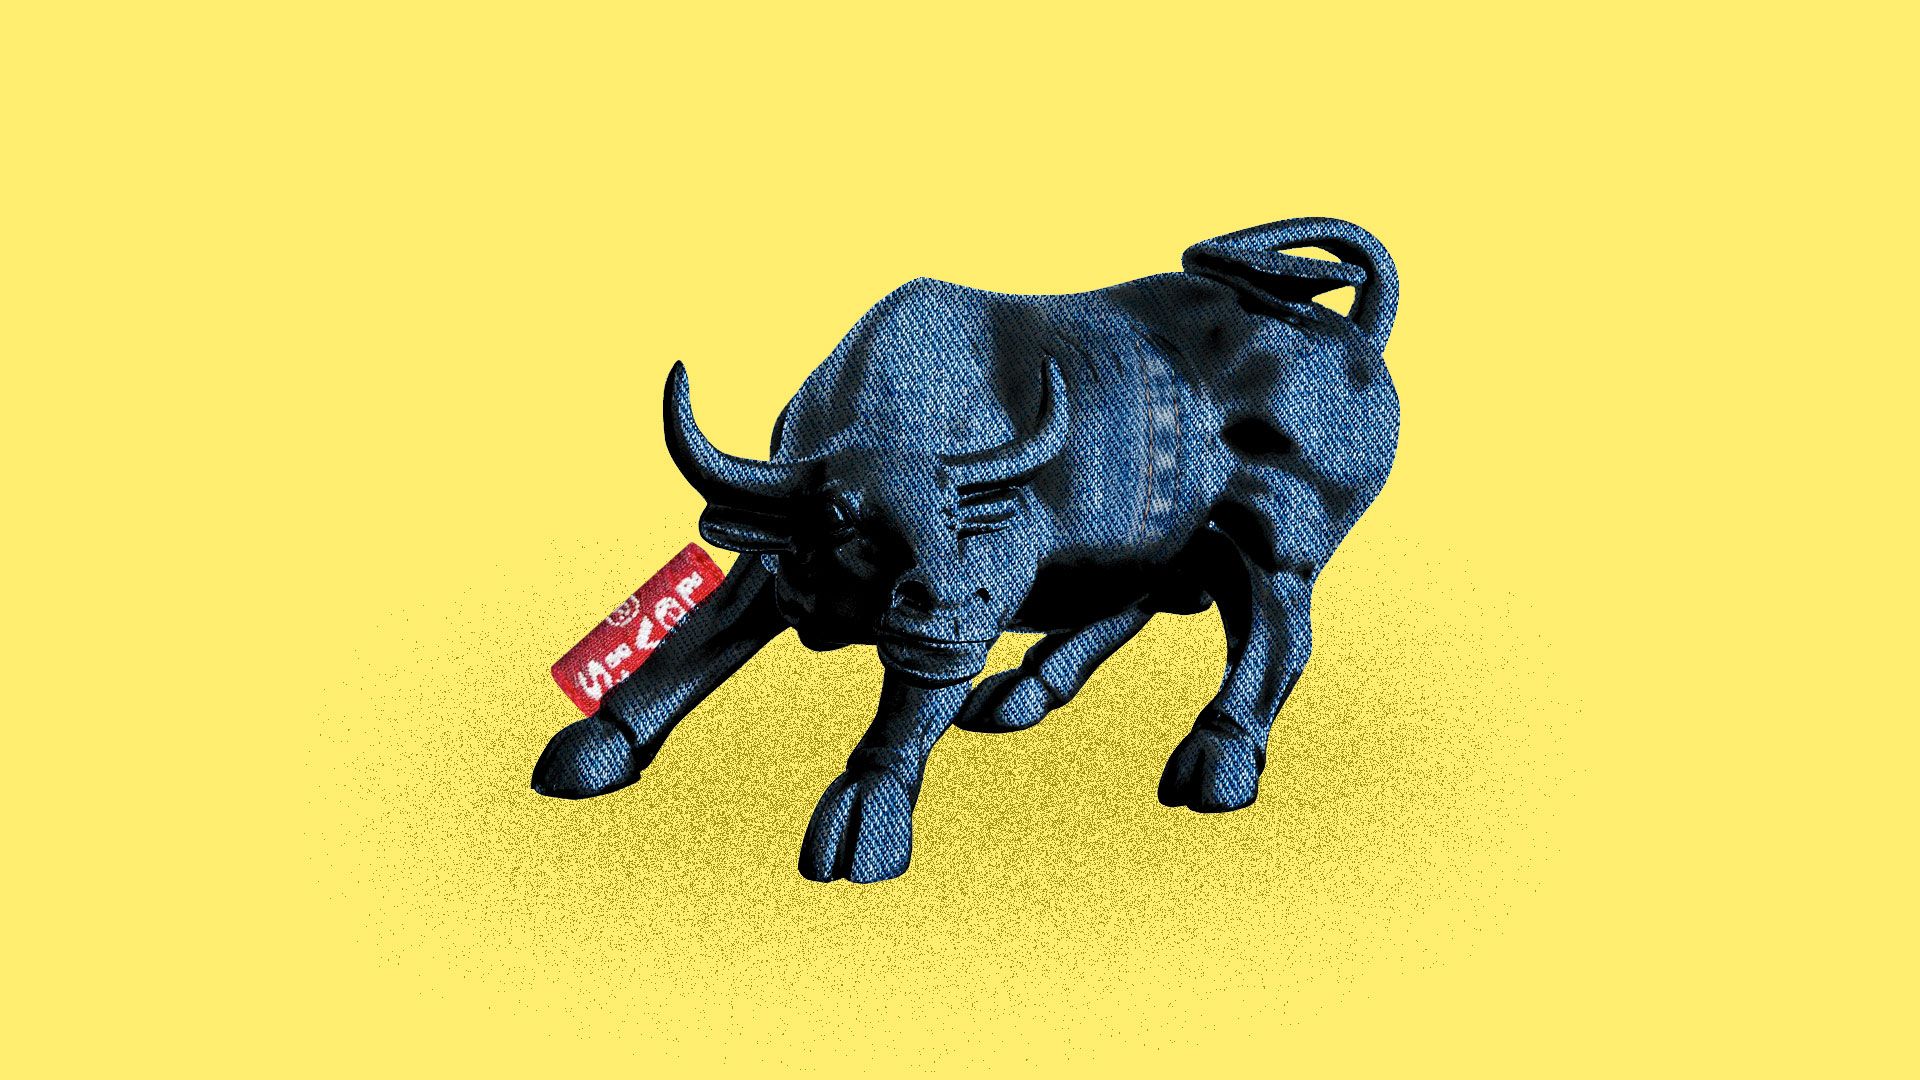 Illustration of the Wall Street bull made out of denim with a small Levi's tag showing.